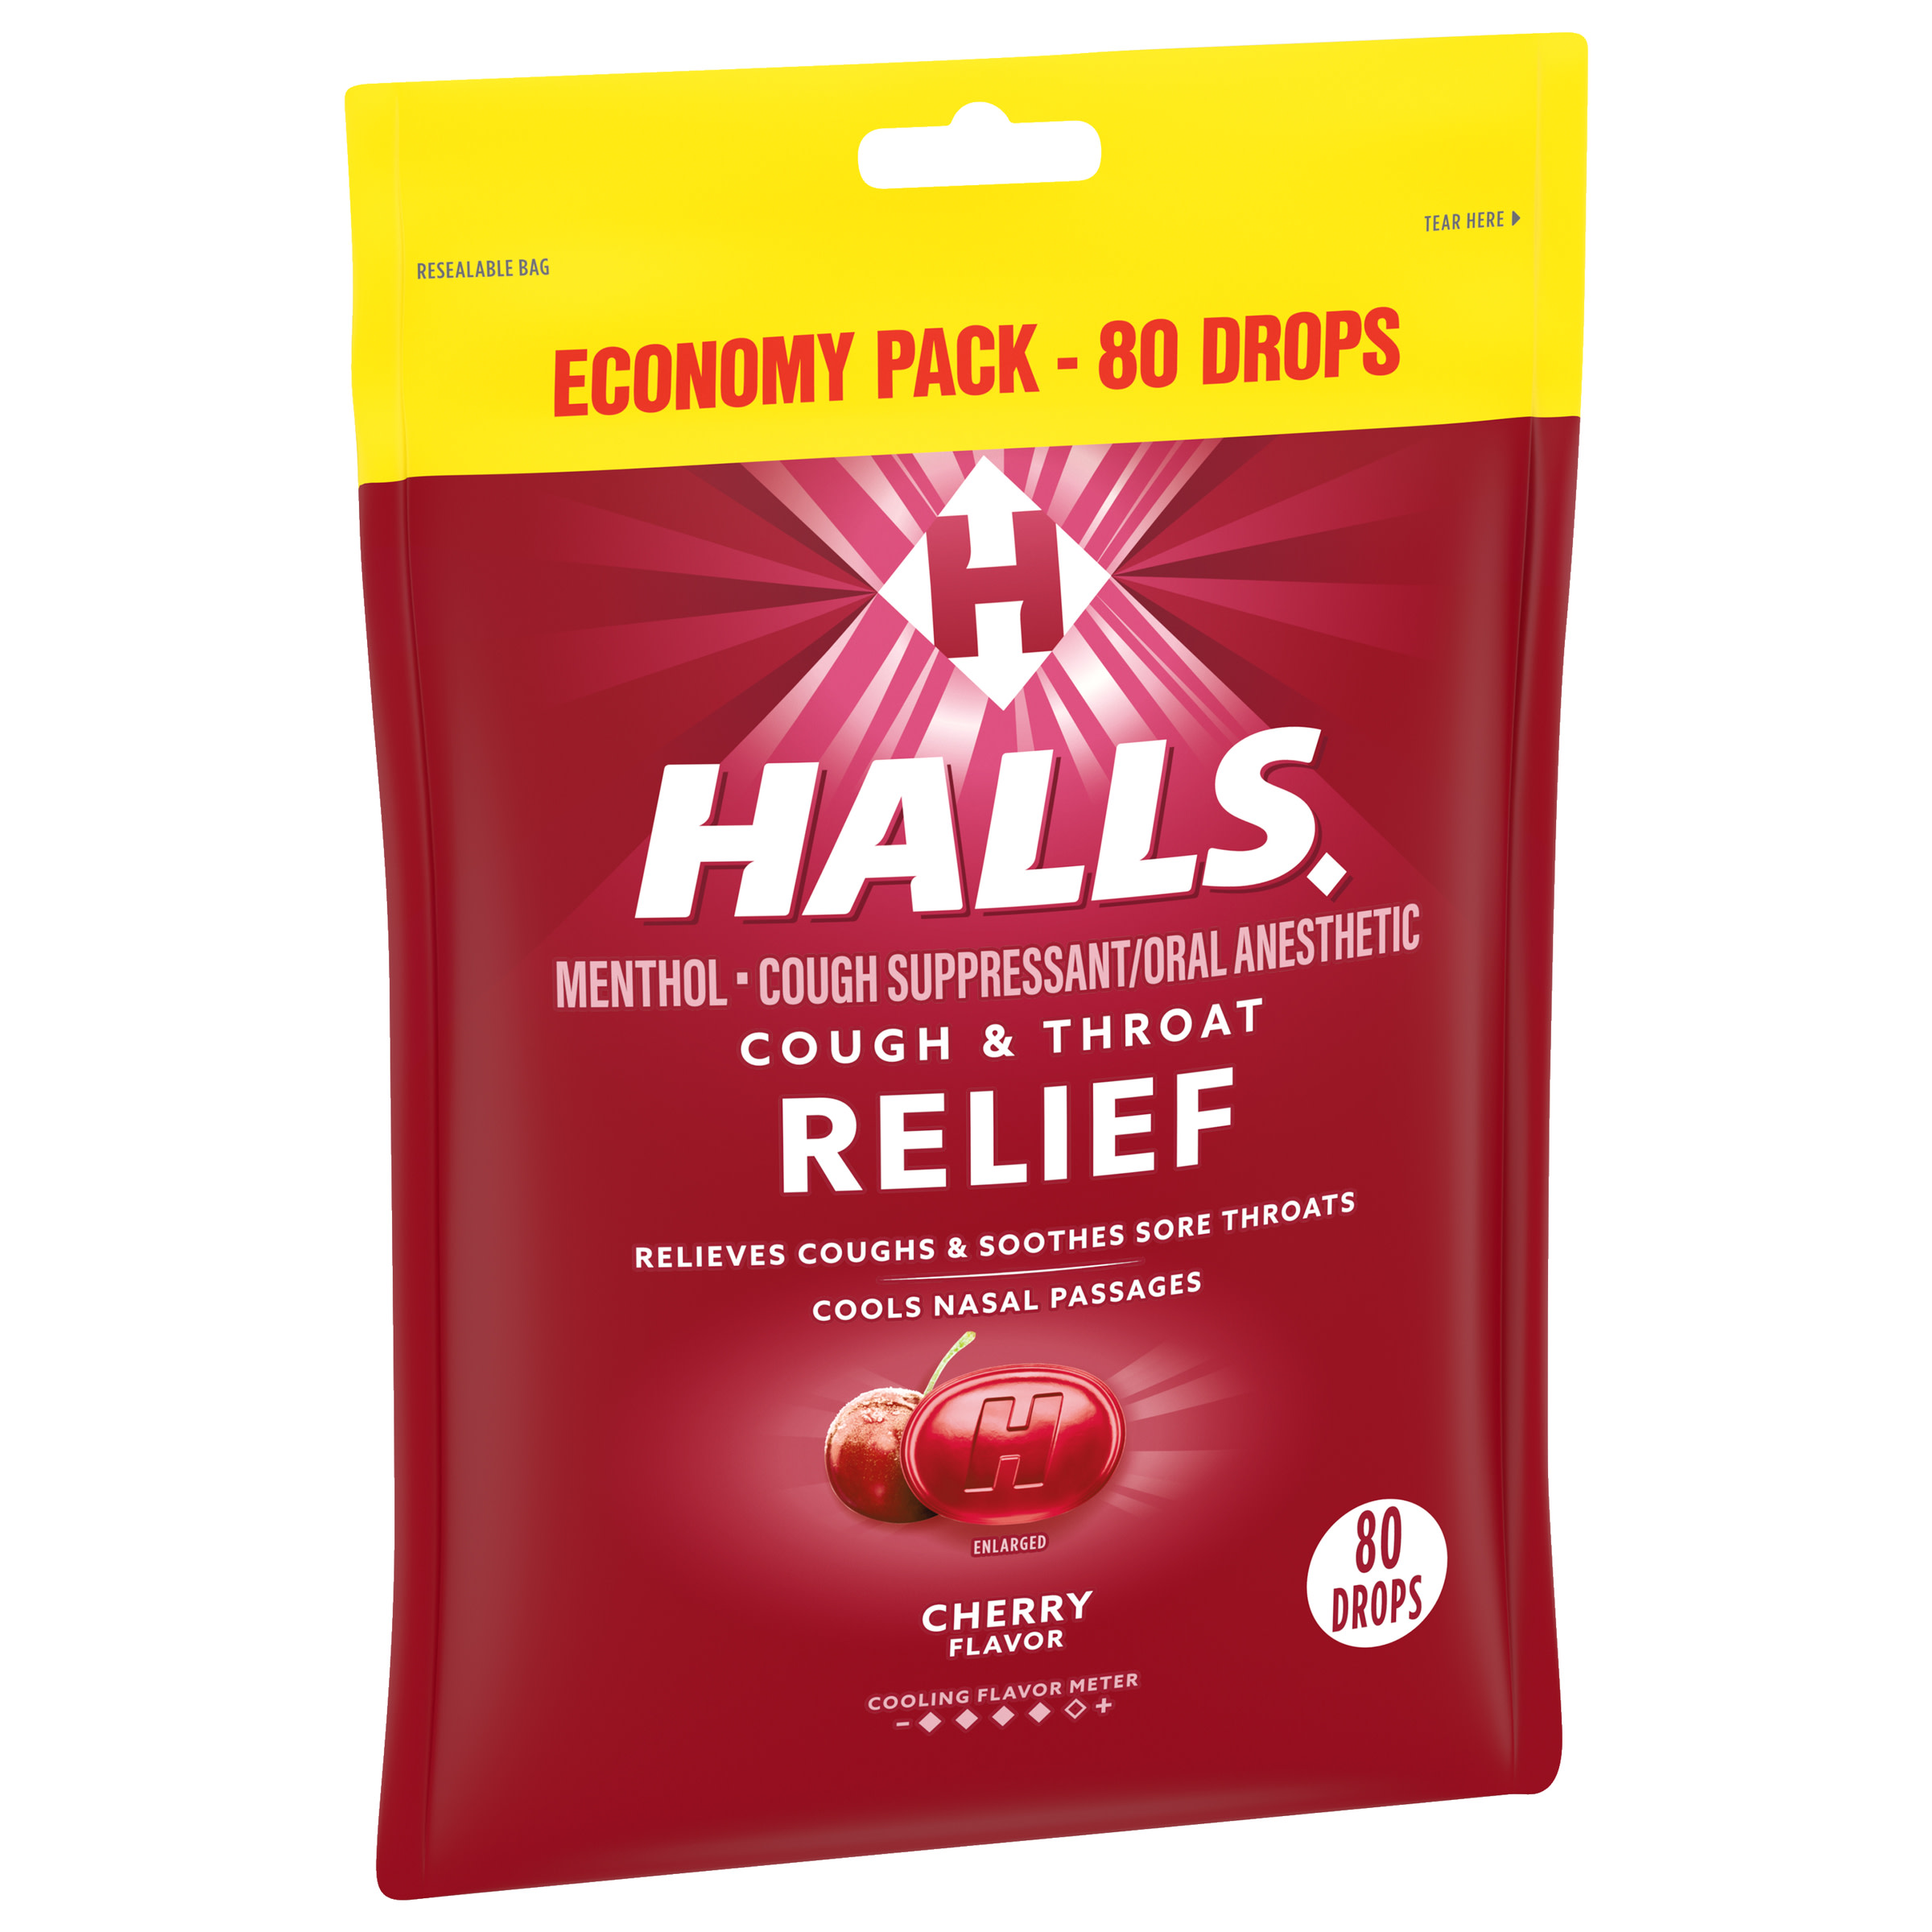 HALLS Relief Cherry Cough Drops, Economy Pack, 80 Drops - image 2 of 12